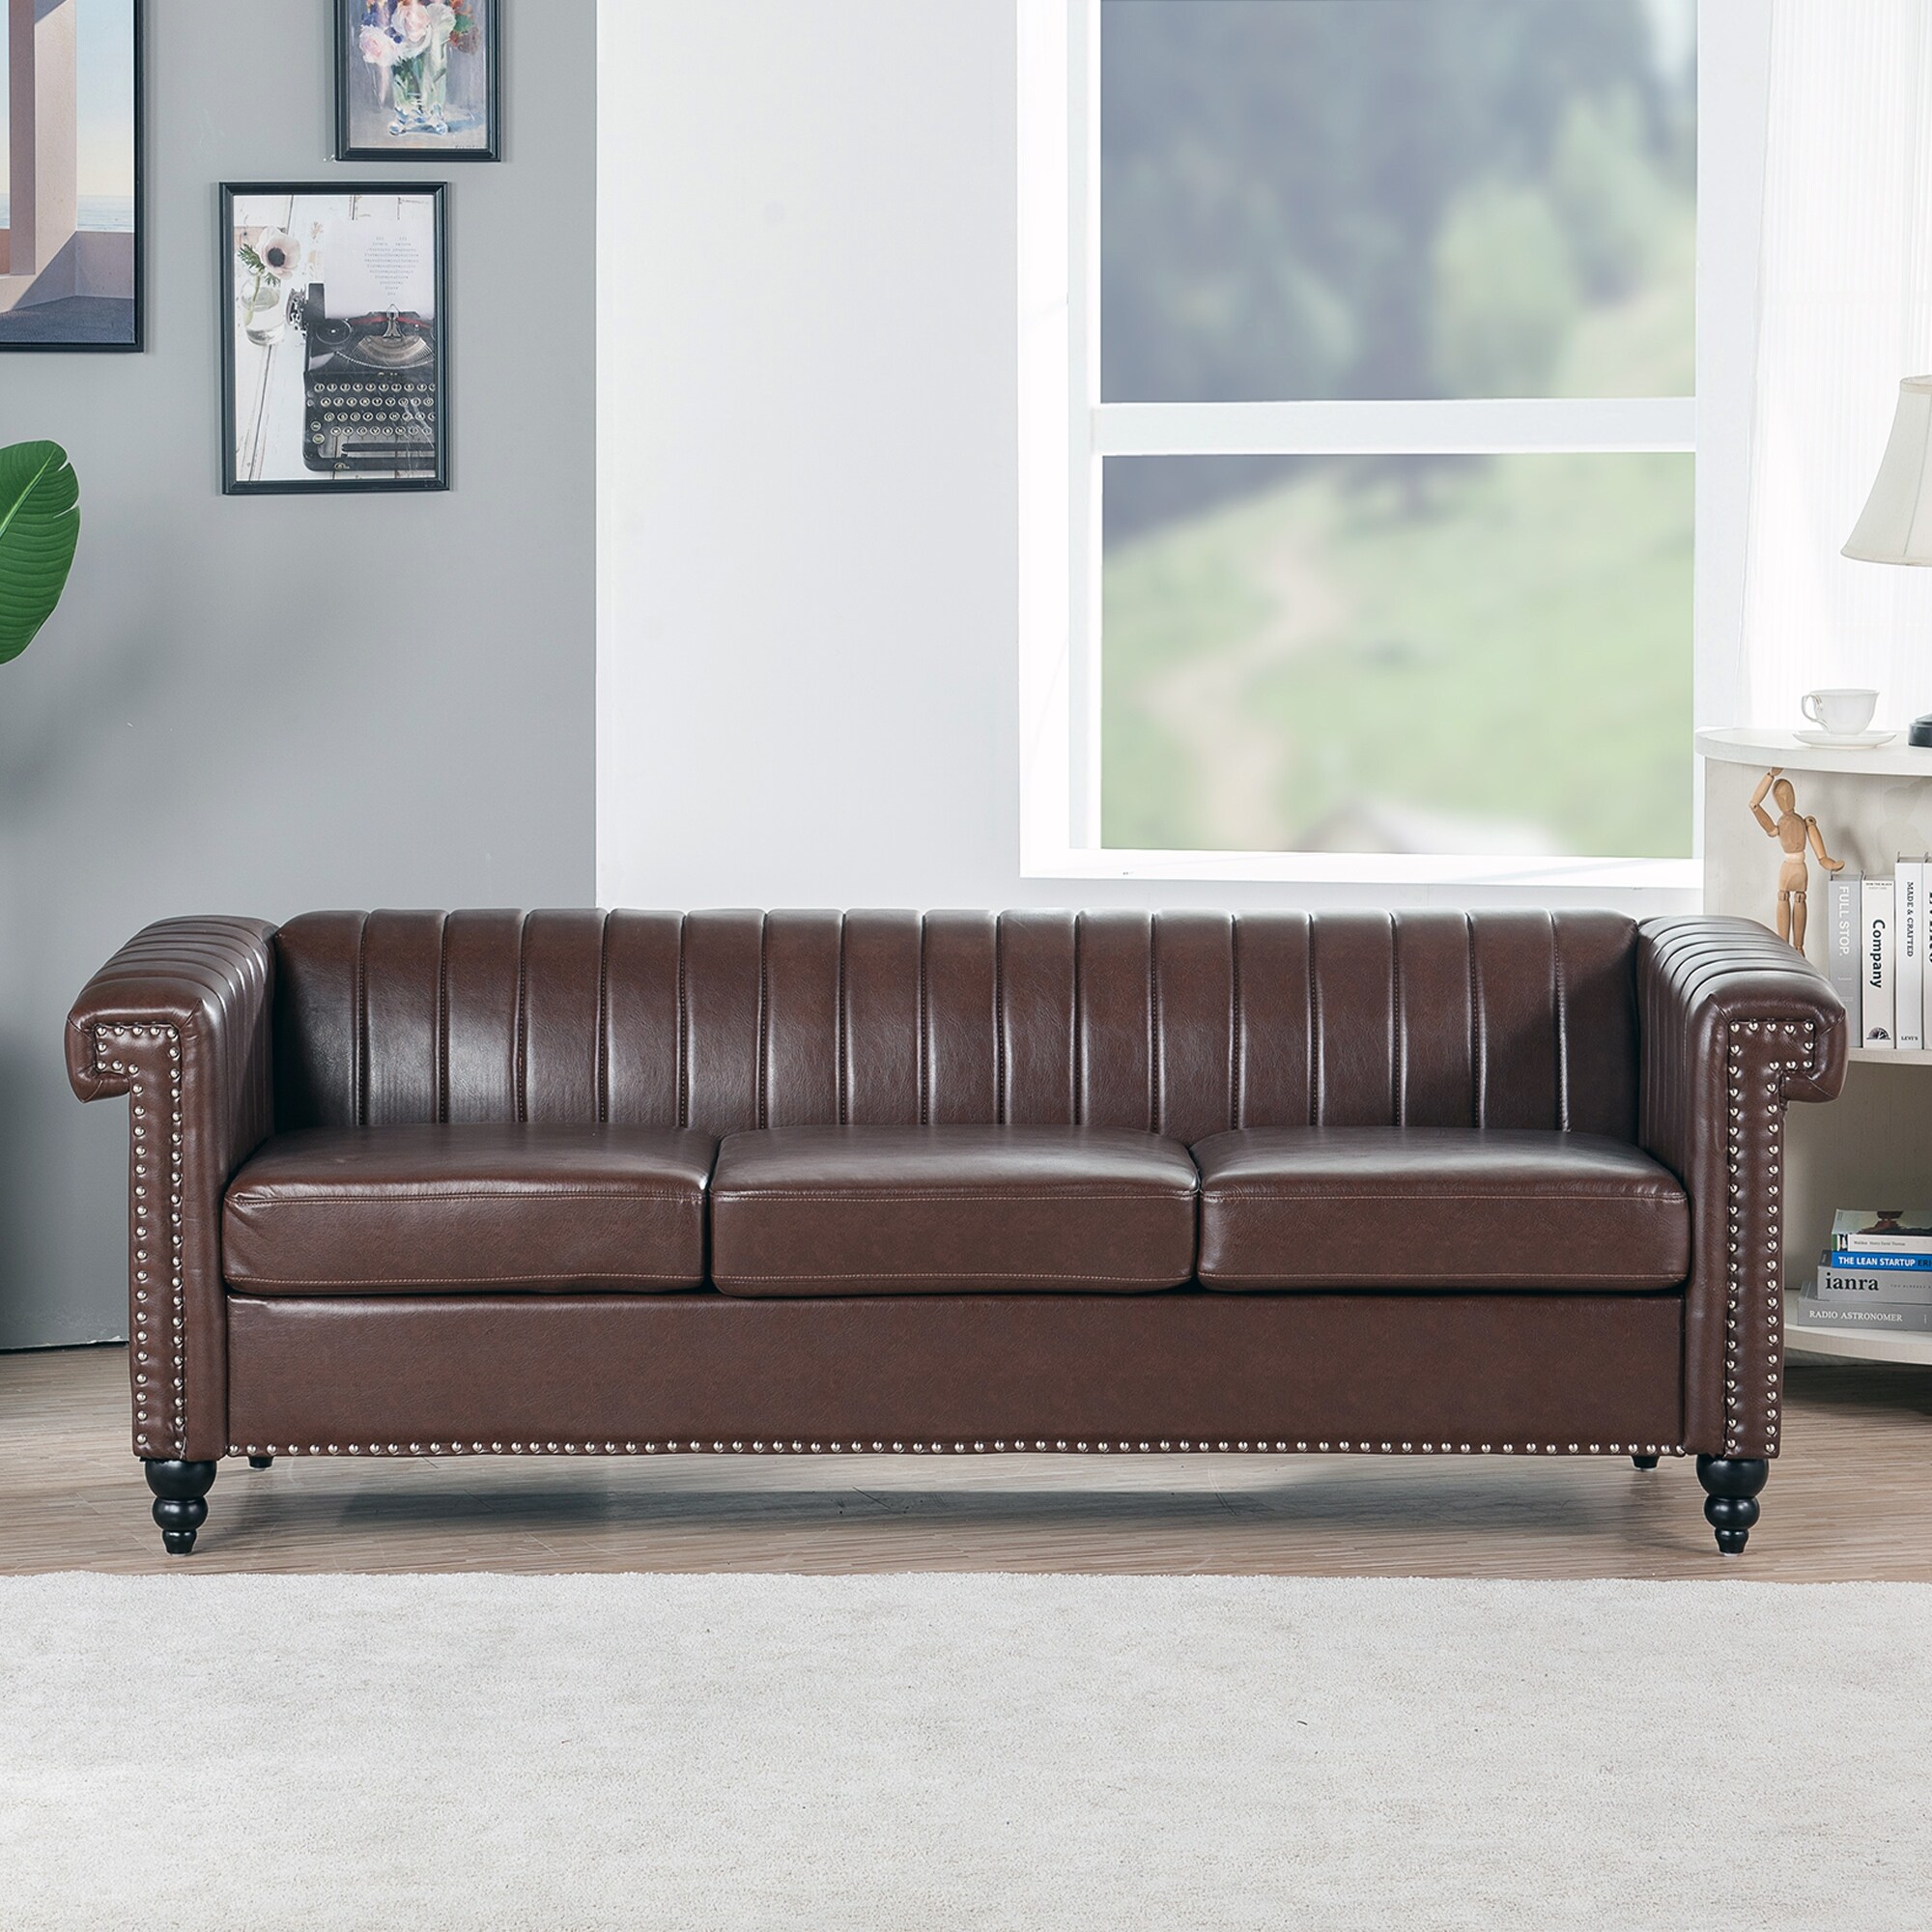 https://ak1.ostkcdn.com/images/products/is/images/direct/3917abf037baf8ecc585bfd1a28db72e9e71297d/Traditional-3-Seater-Sofa-82.5%22-Width-Square-Arm-Removable-Cushion-Sofa-for-Living-Room.jpg